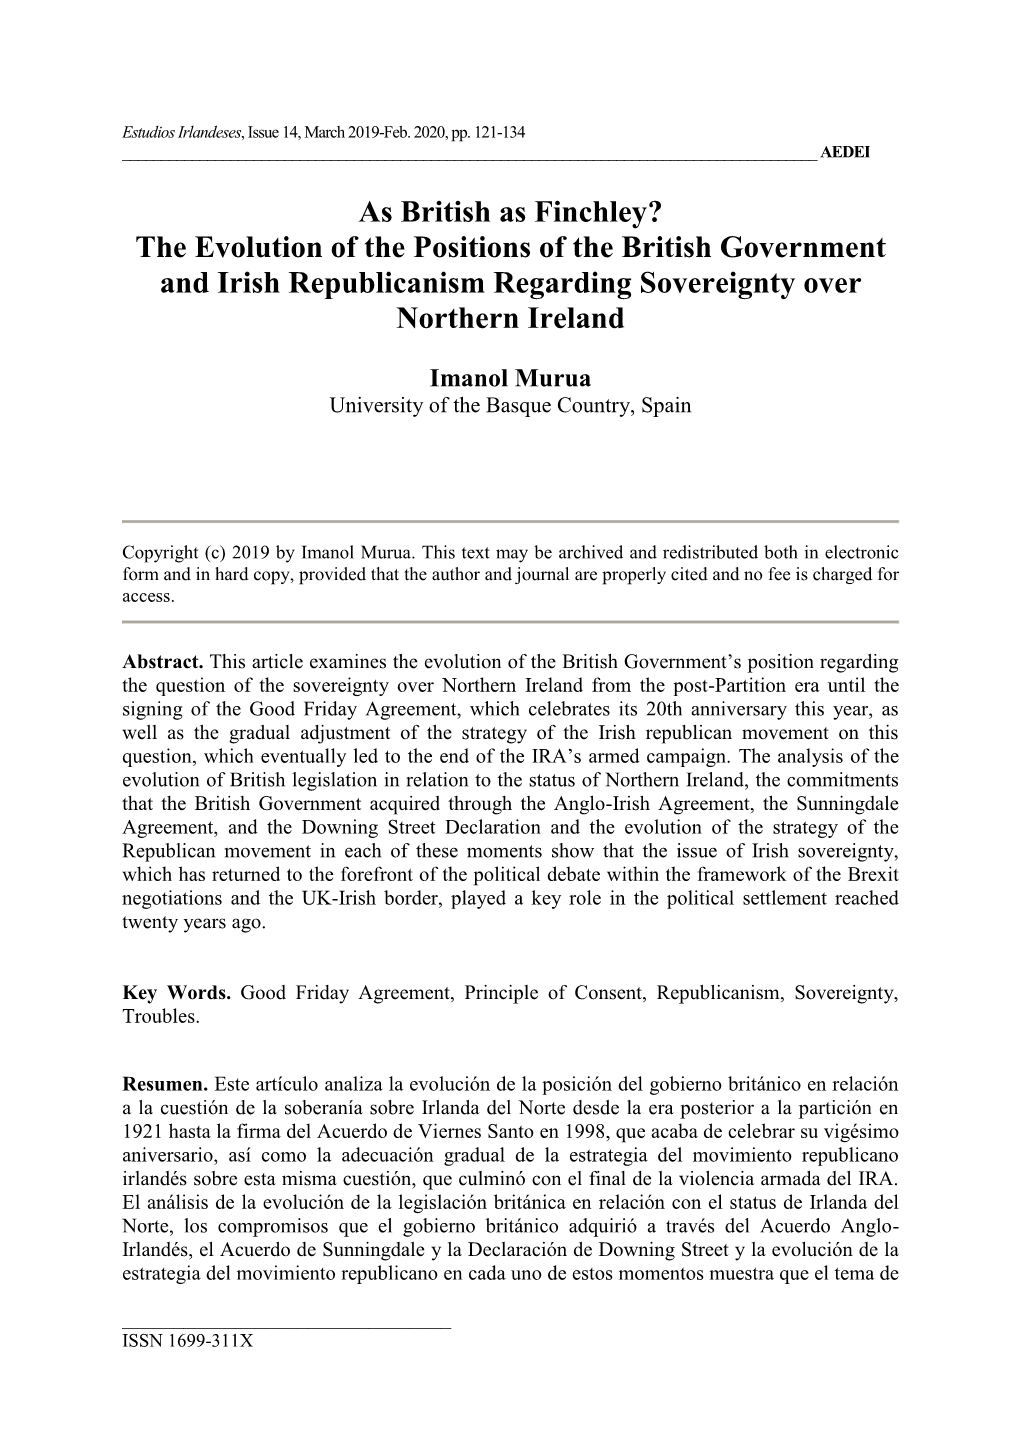 The Evolution of the Positions of the British Government and Irish Republicanism Regarding Sovereignty Over Northern Ireland